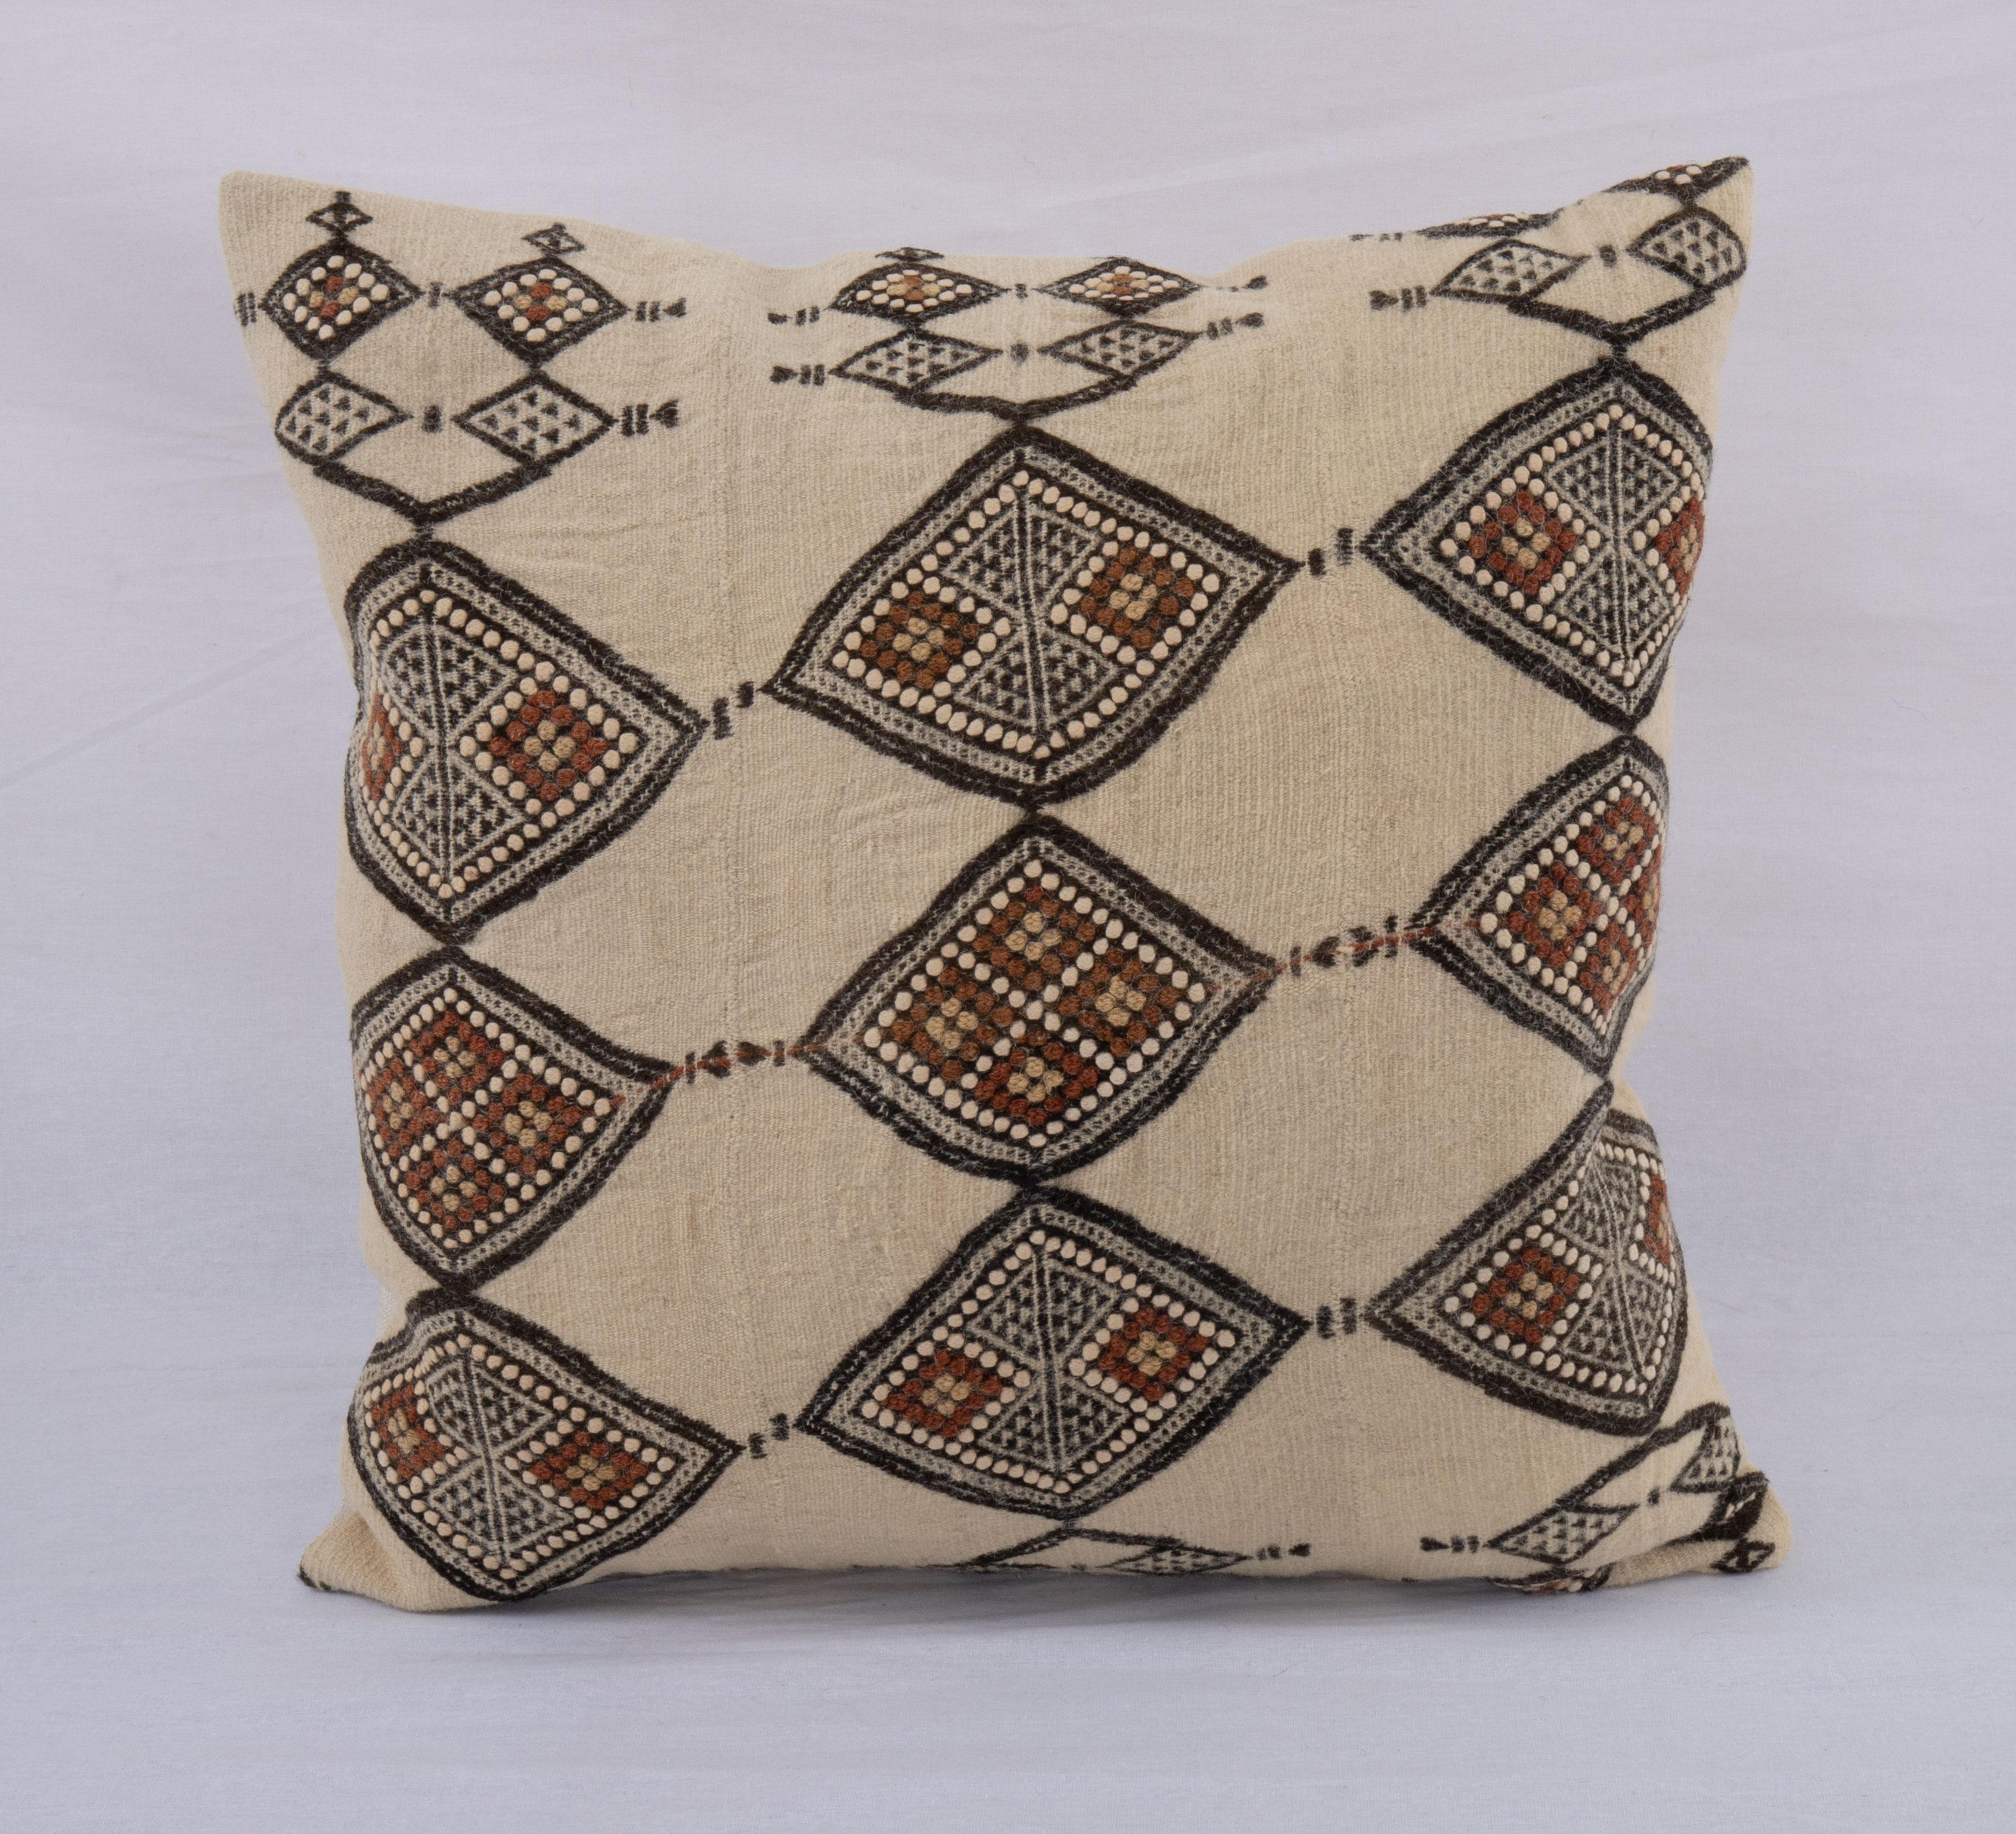 Pillow Cover Made from a Vintage West African Fulani Blanket


It does not come with an insert but a bag made from cotton fabric to accommodate insert materials.
Linen in the back.
Zipper closure.
Dry Cleaning reccommeded.
